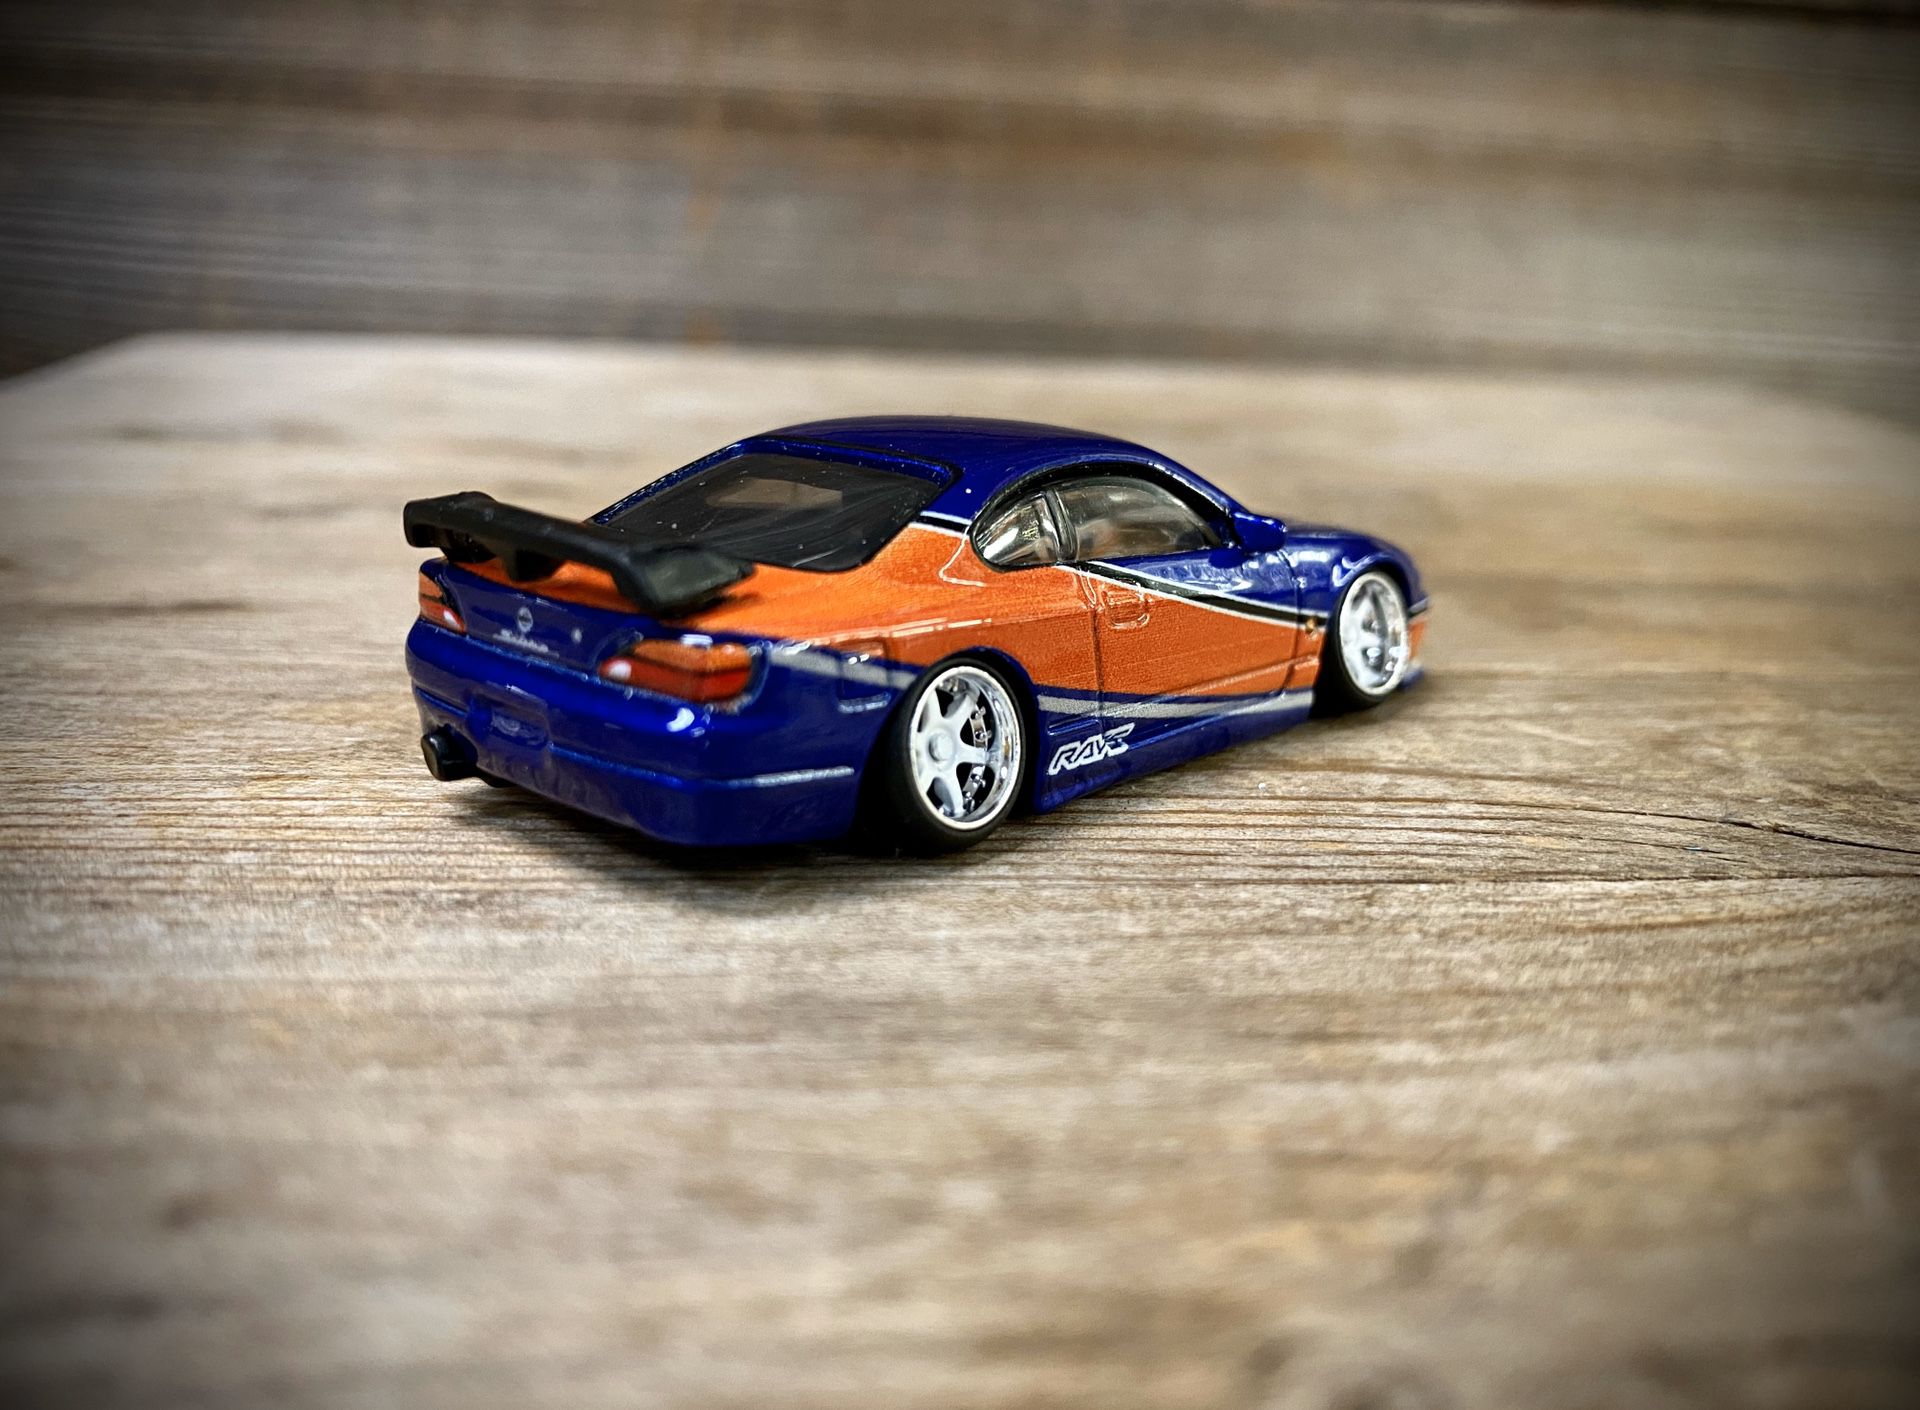 CUSTOM 1:64 Nissan Sylvia S15 “Mona Lisa” - Hot Wheels x Fast and Furious (Lowered+camber with upgraded premium 6-spoke white wheels with chrome lip)